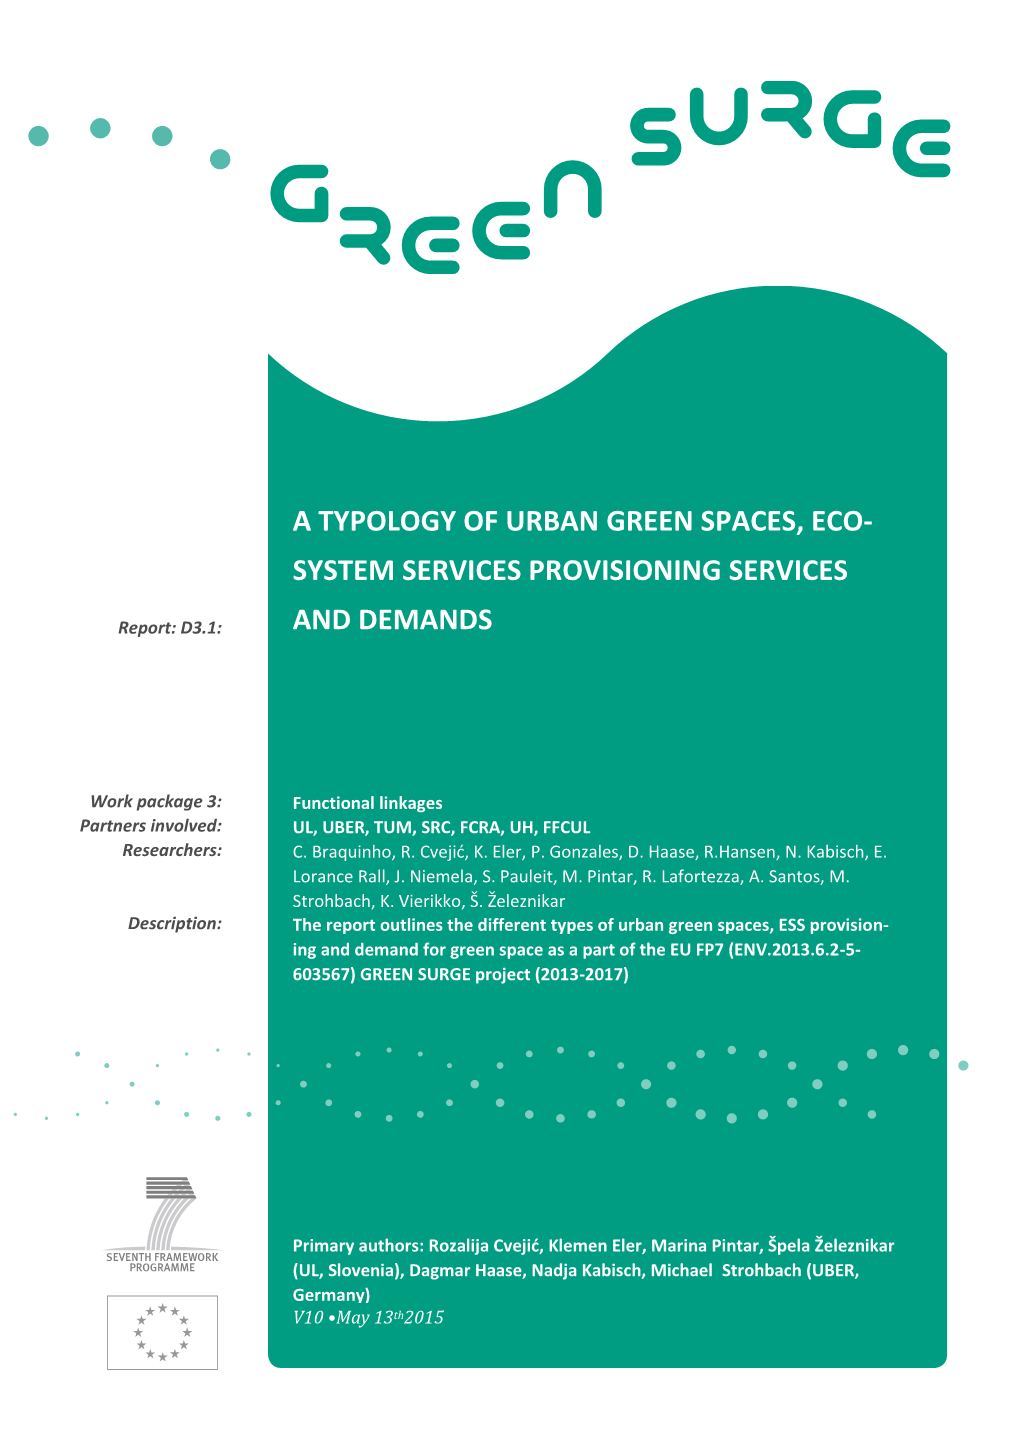 A Typology of Urban Green Spaces, Eco- System Services Provisioning Services